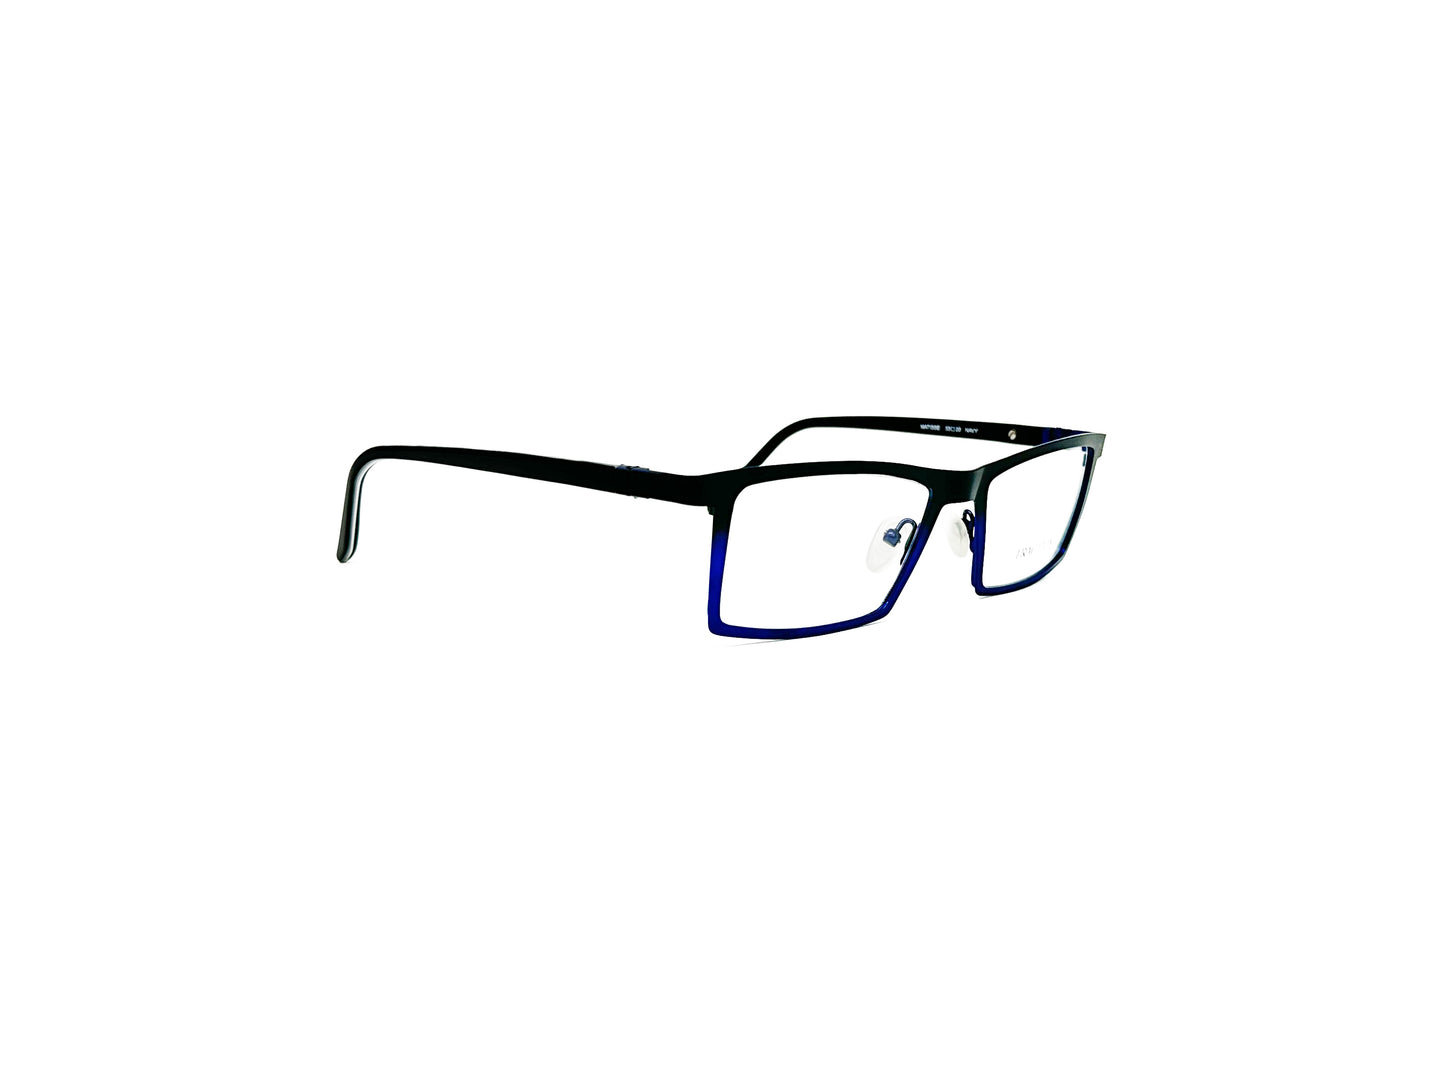 Traction rectangular optical frame. Model: Matisse. Color: Navy. Side view.